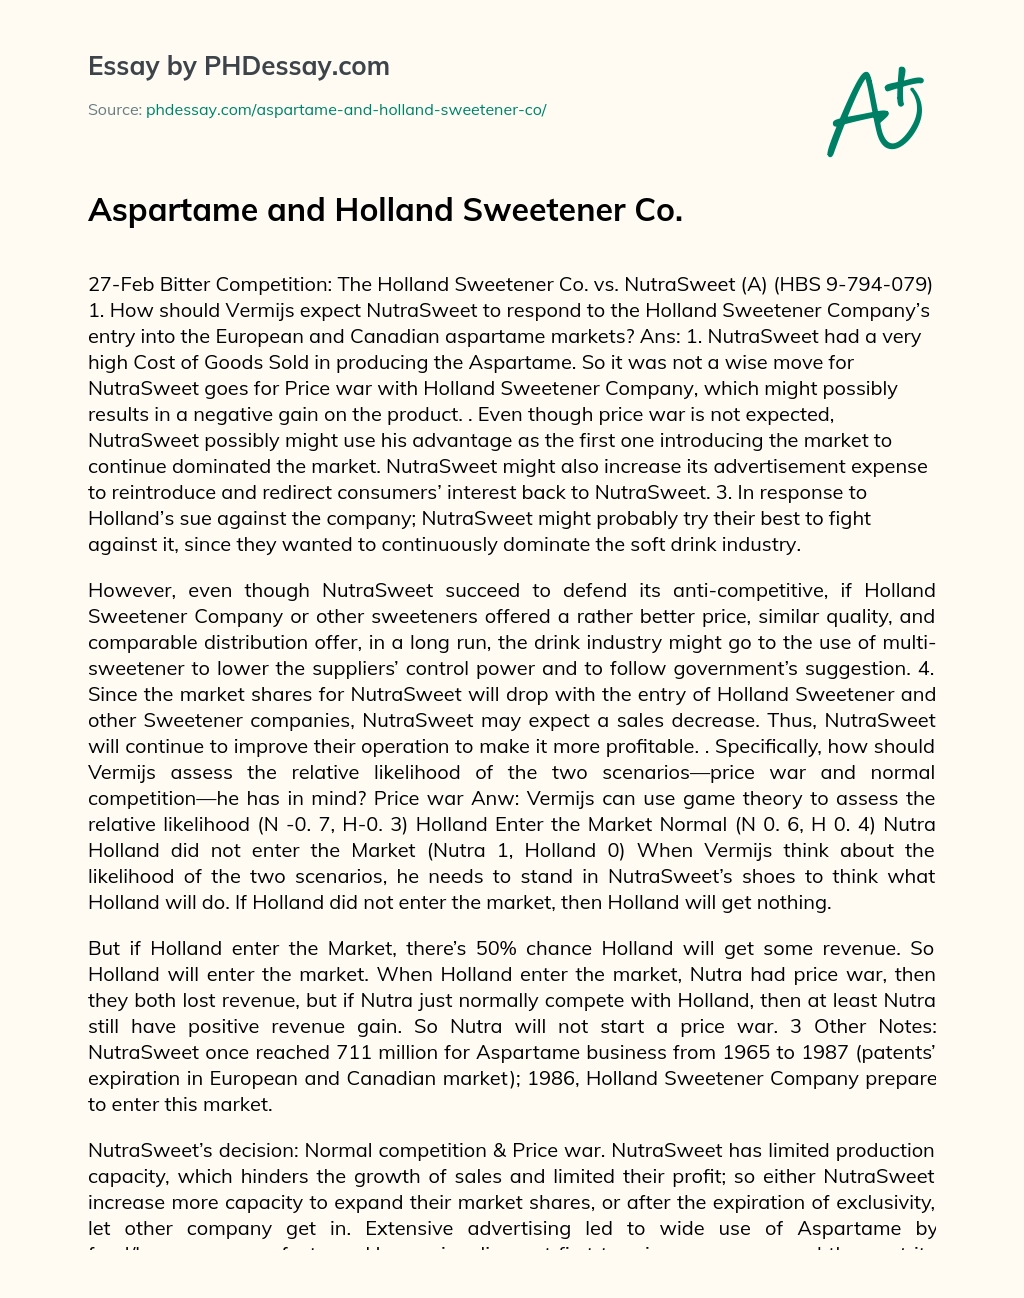 Aspartame and Holland Sweetener Co. essay